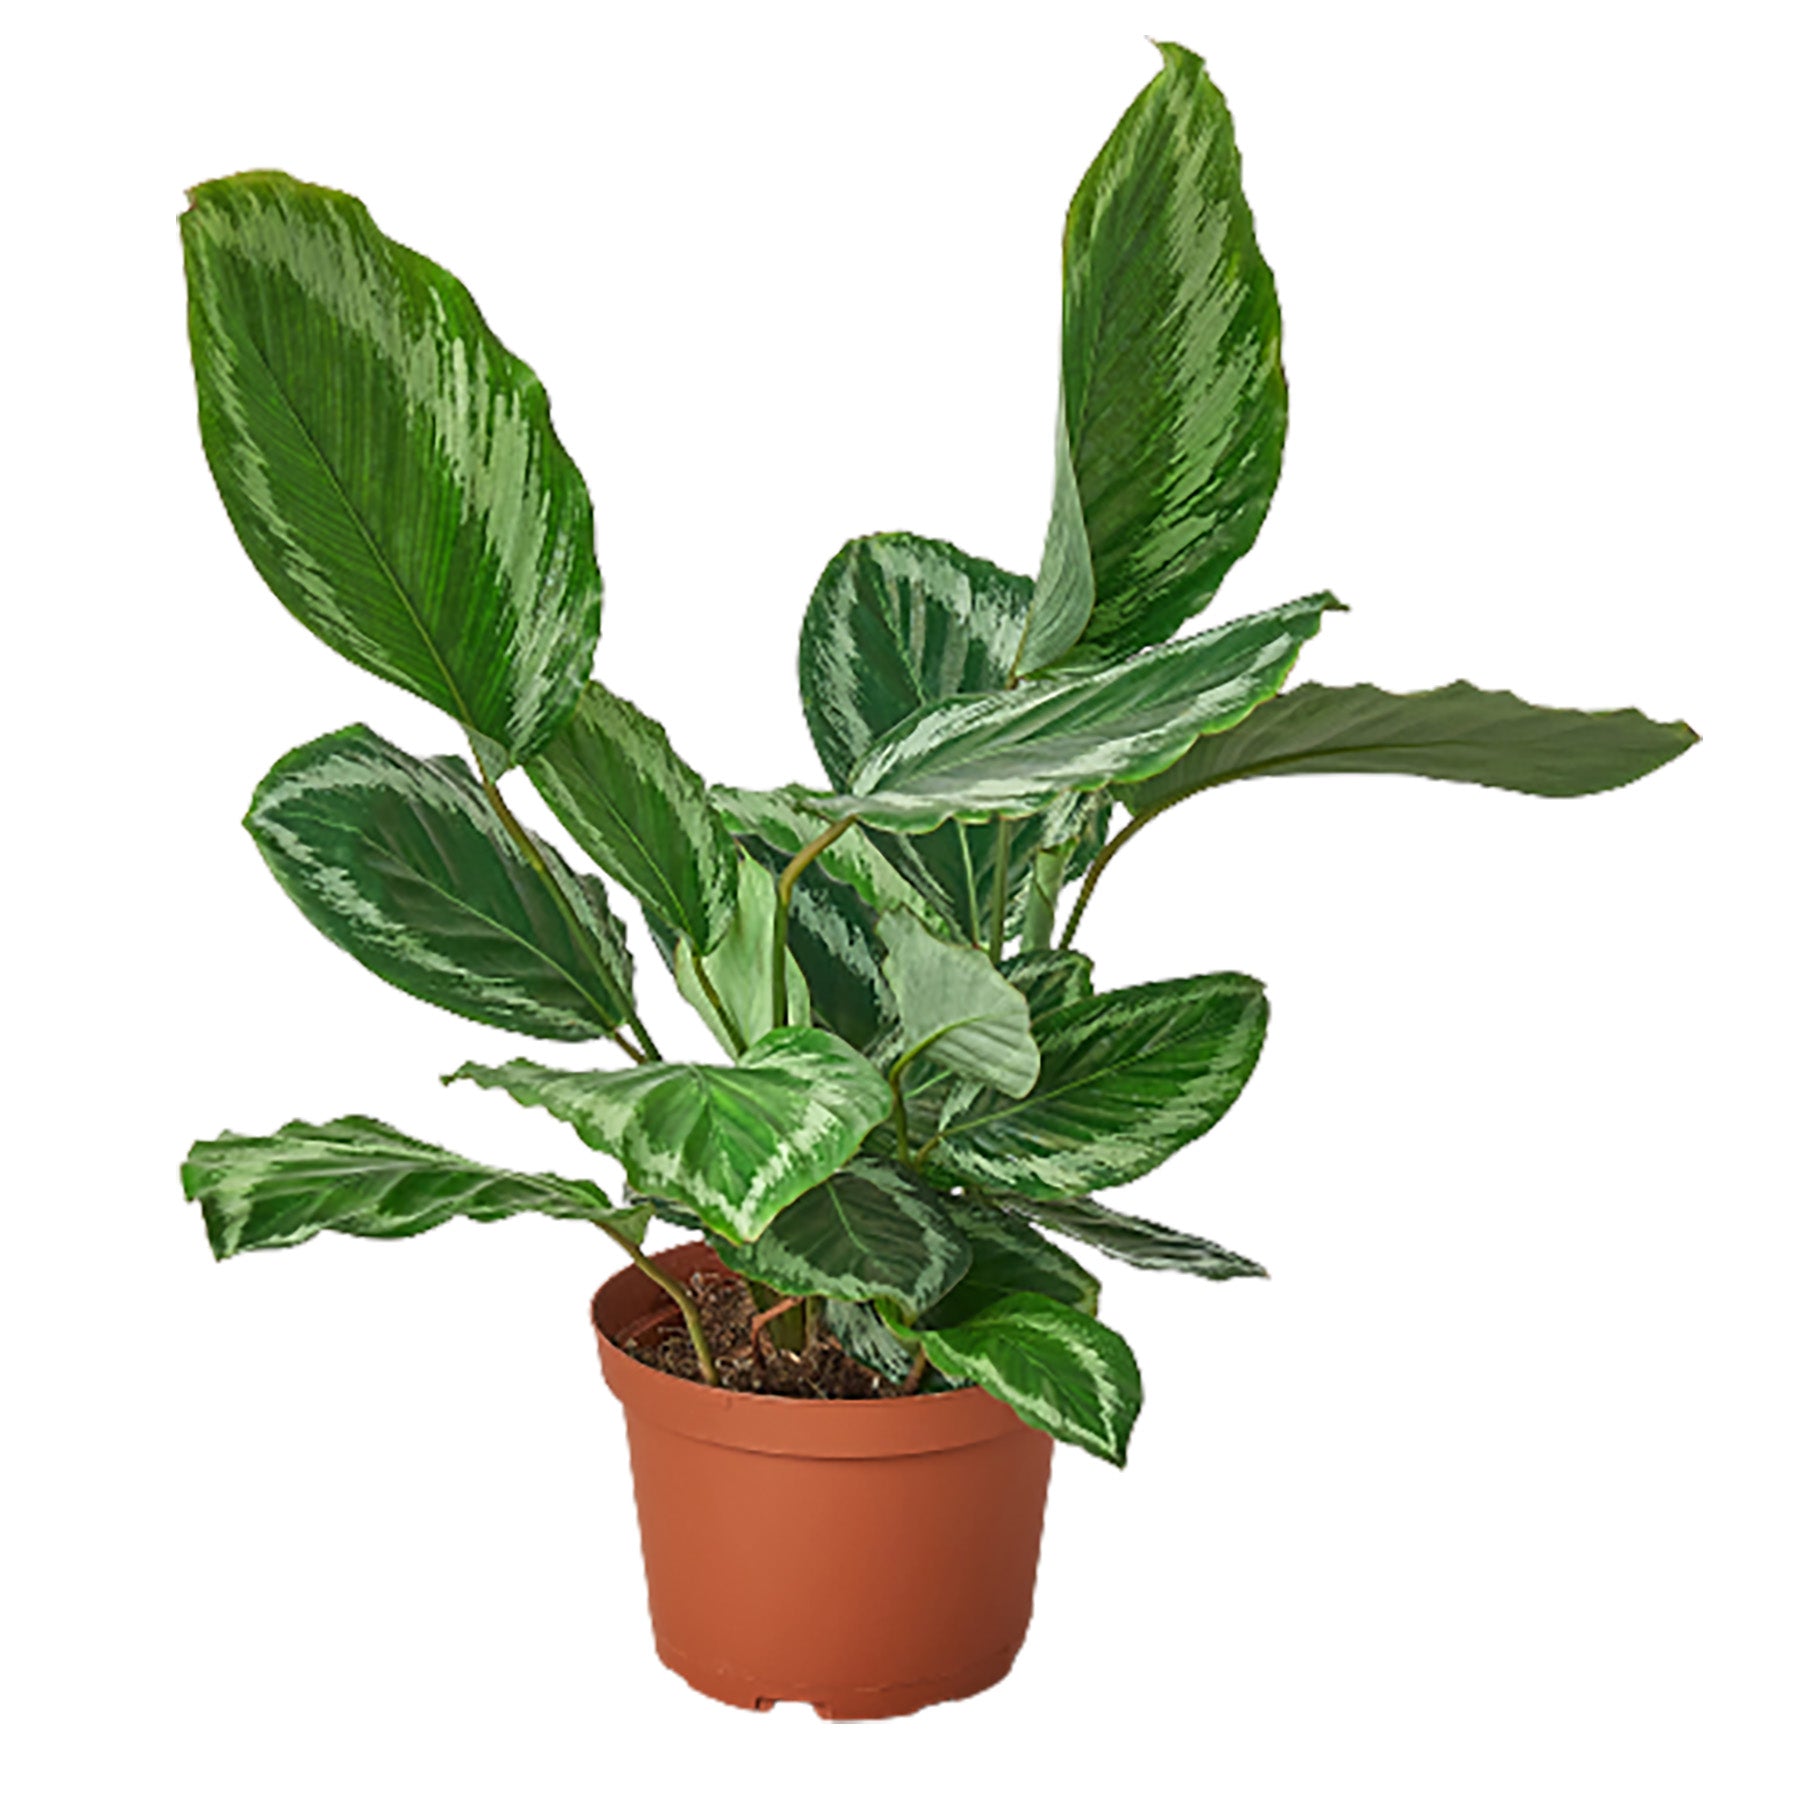 A potted plant with green leaves on a white background, available at the best garden center near me.